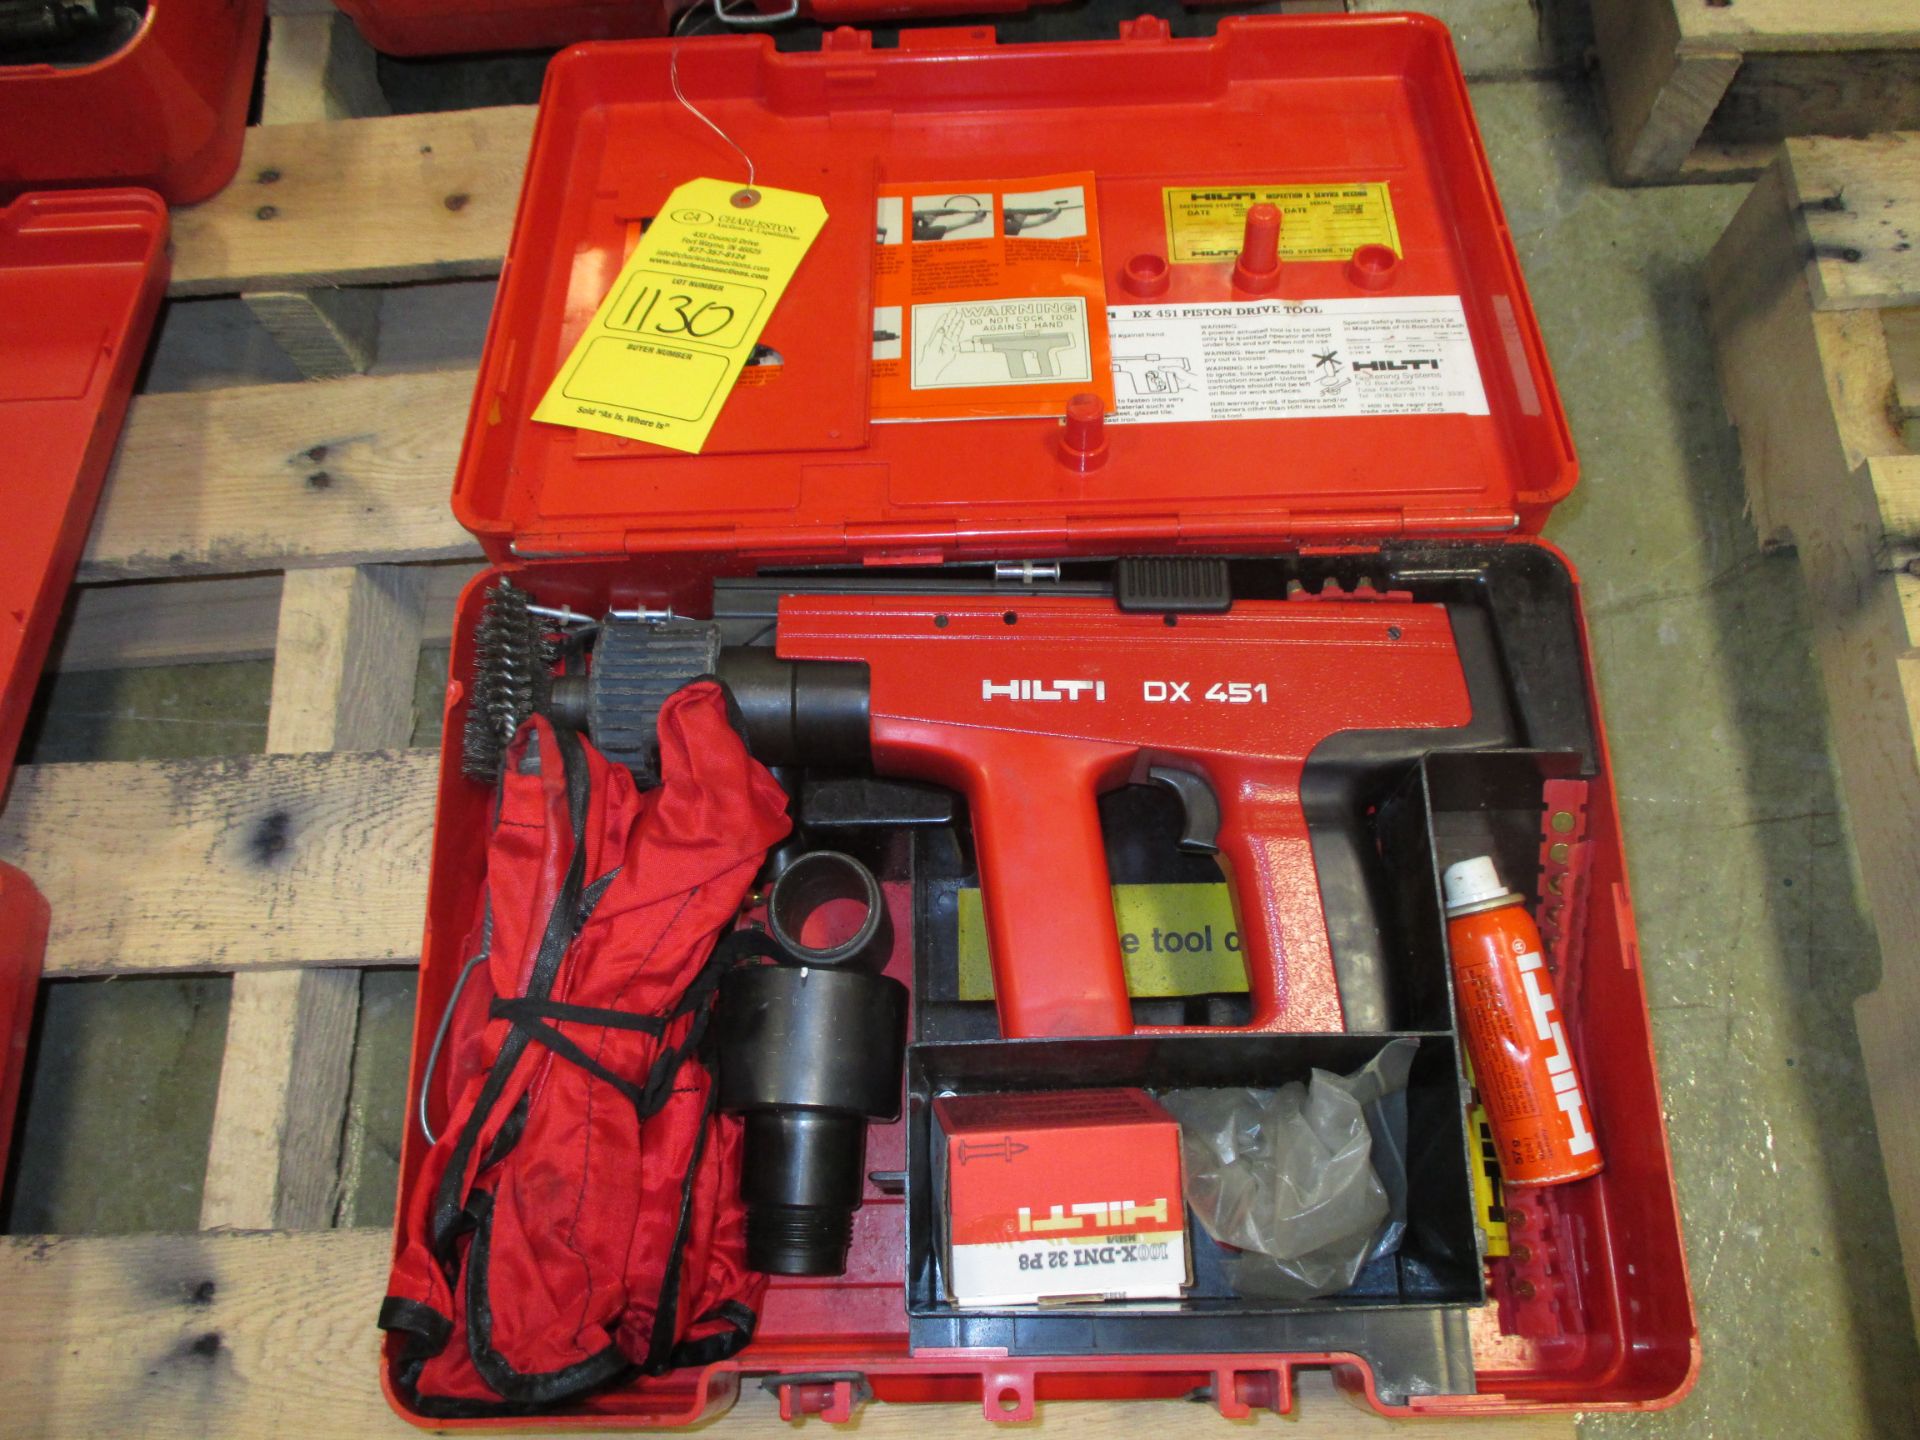 HILTI DX452 1320 Production Road, Fort Wayne, IN 46808